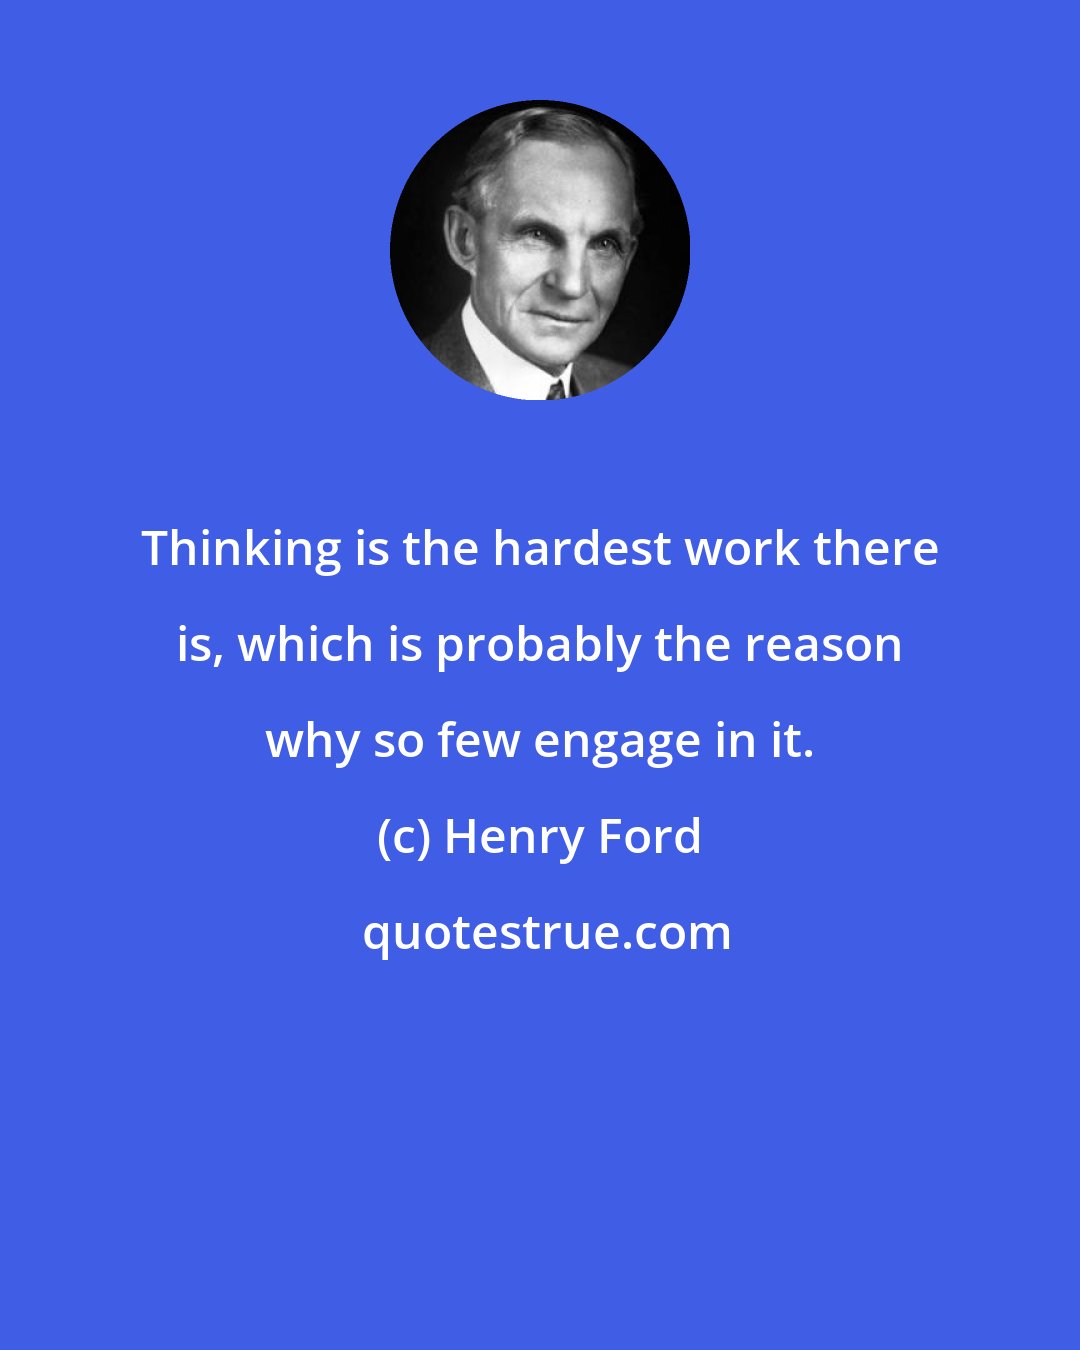 Henry Ford: Thinking is the hardest work there is, which is probably the reason why so few engage in it.